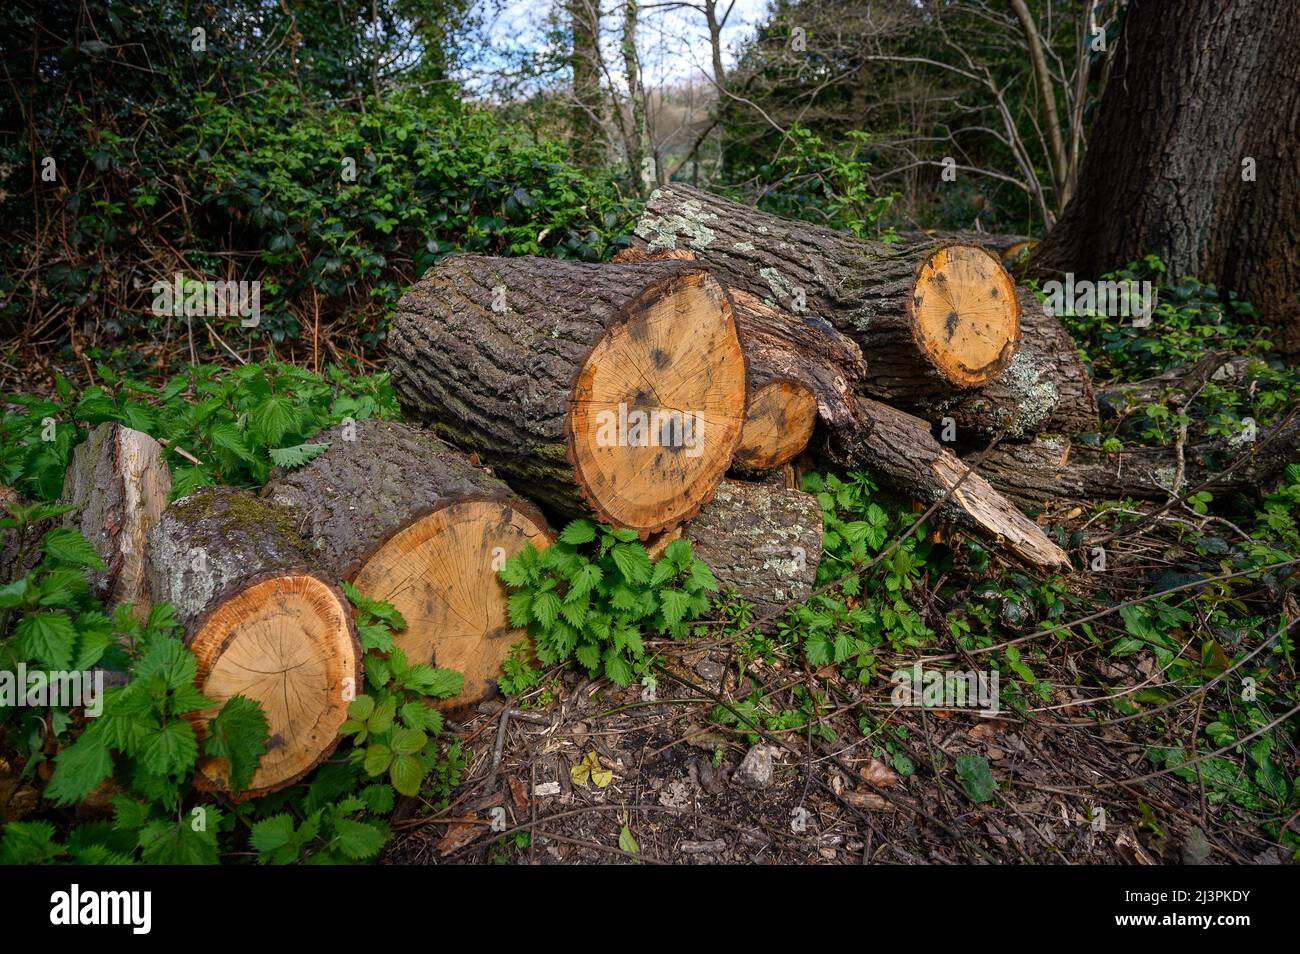 A pile of sawed logs in a wood with nettles and ivy. A scene of man's involvement in the natural environment. Stock Photo